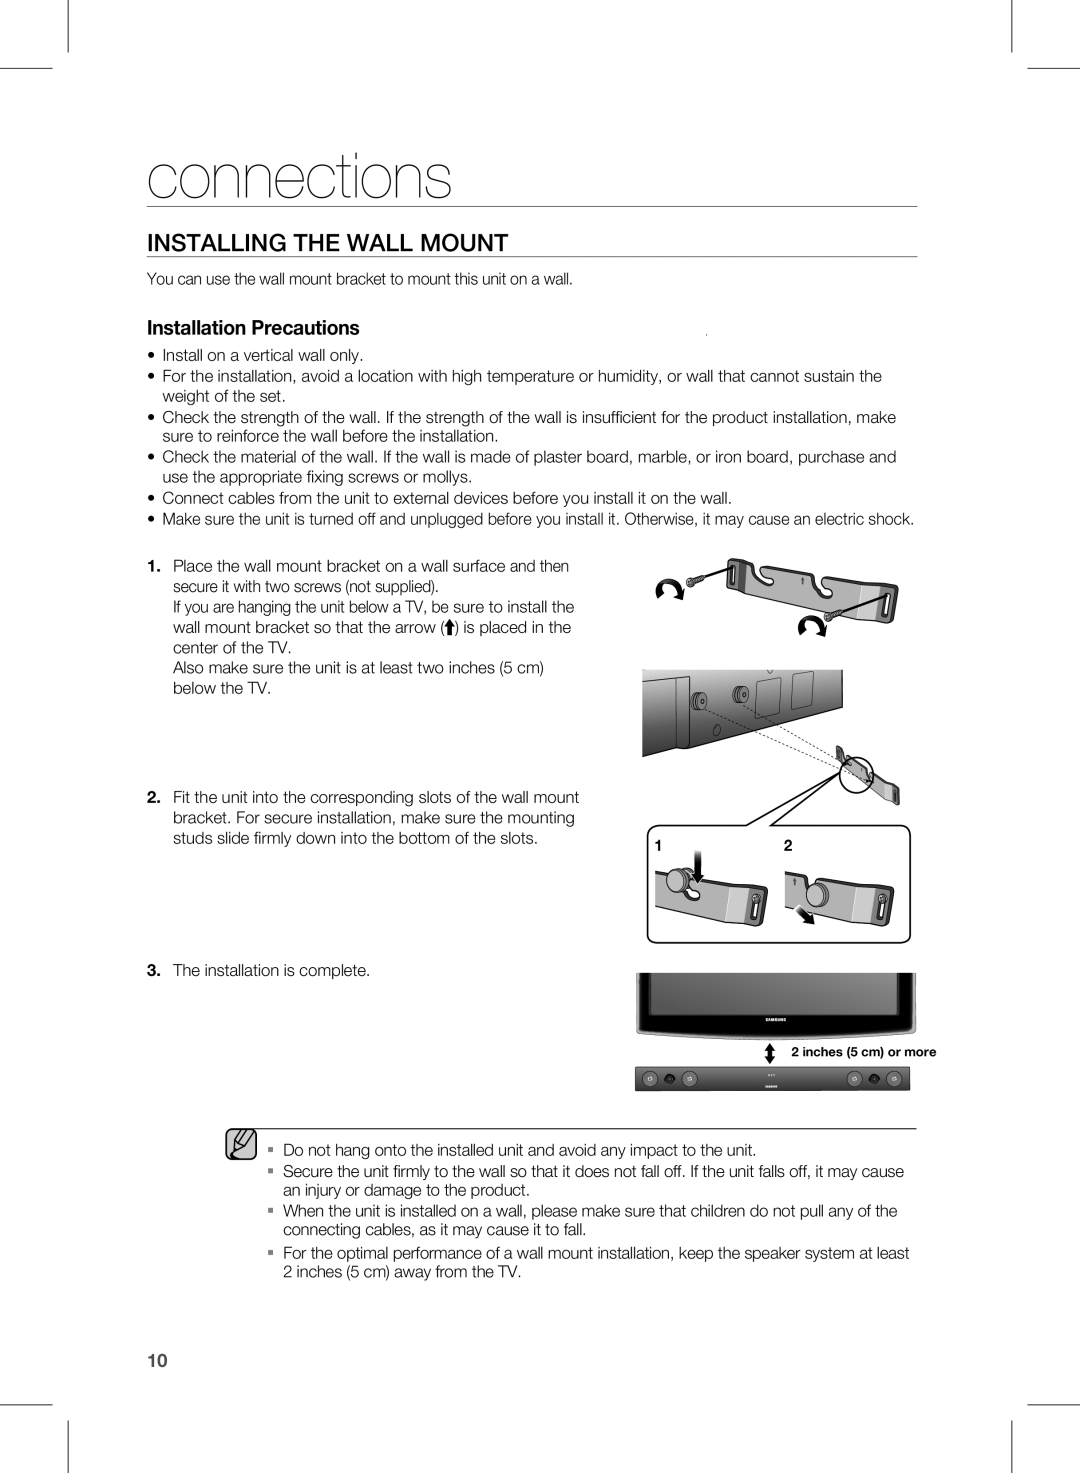 Samsung HW-E450C user manual connections, INSTAllING THE WAll MOUNT, Installation Precautions 